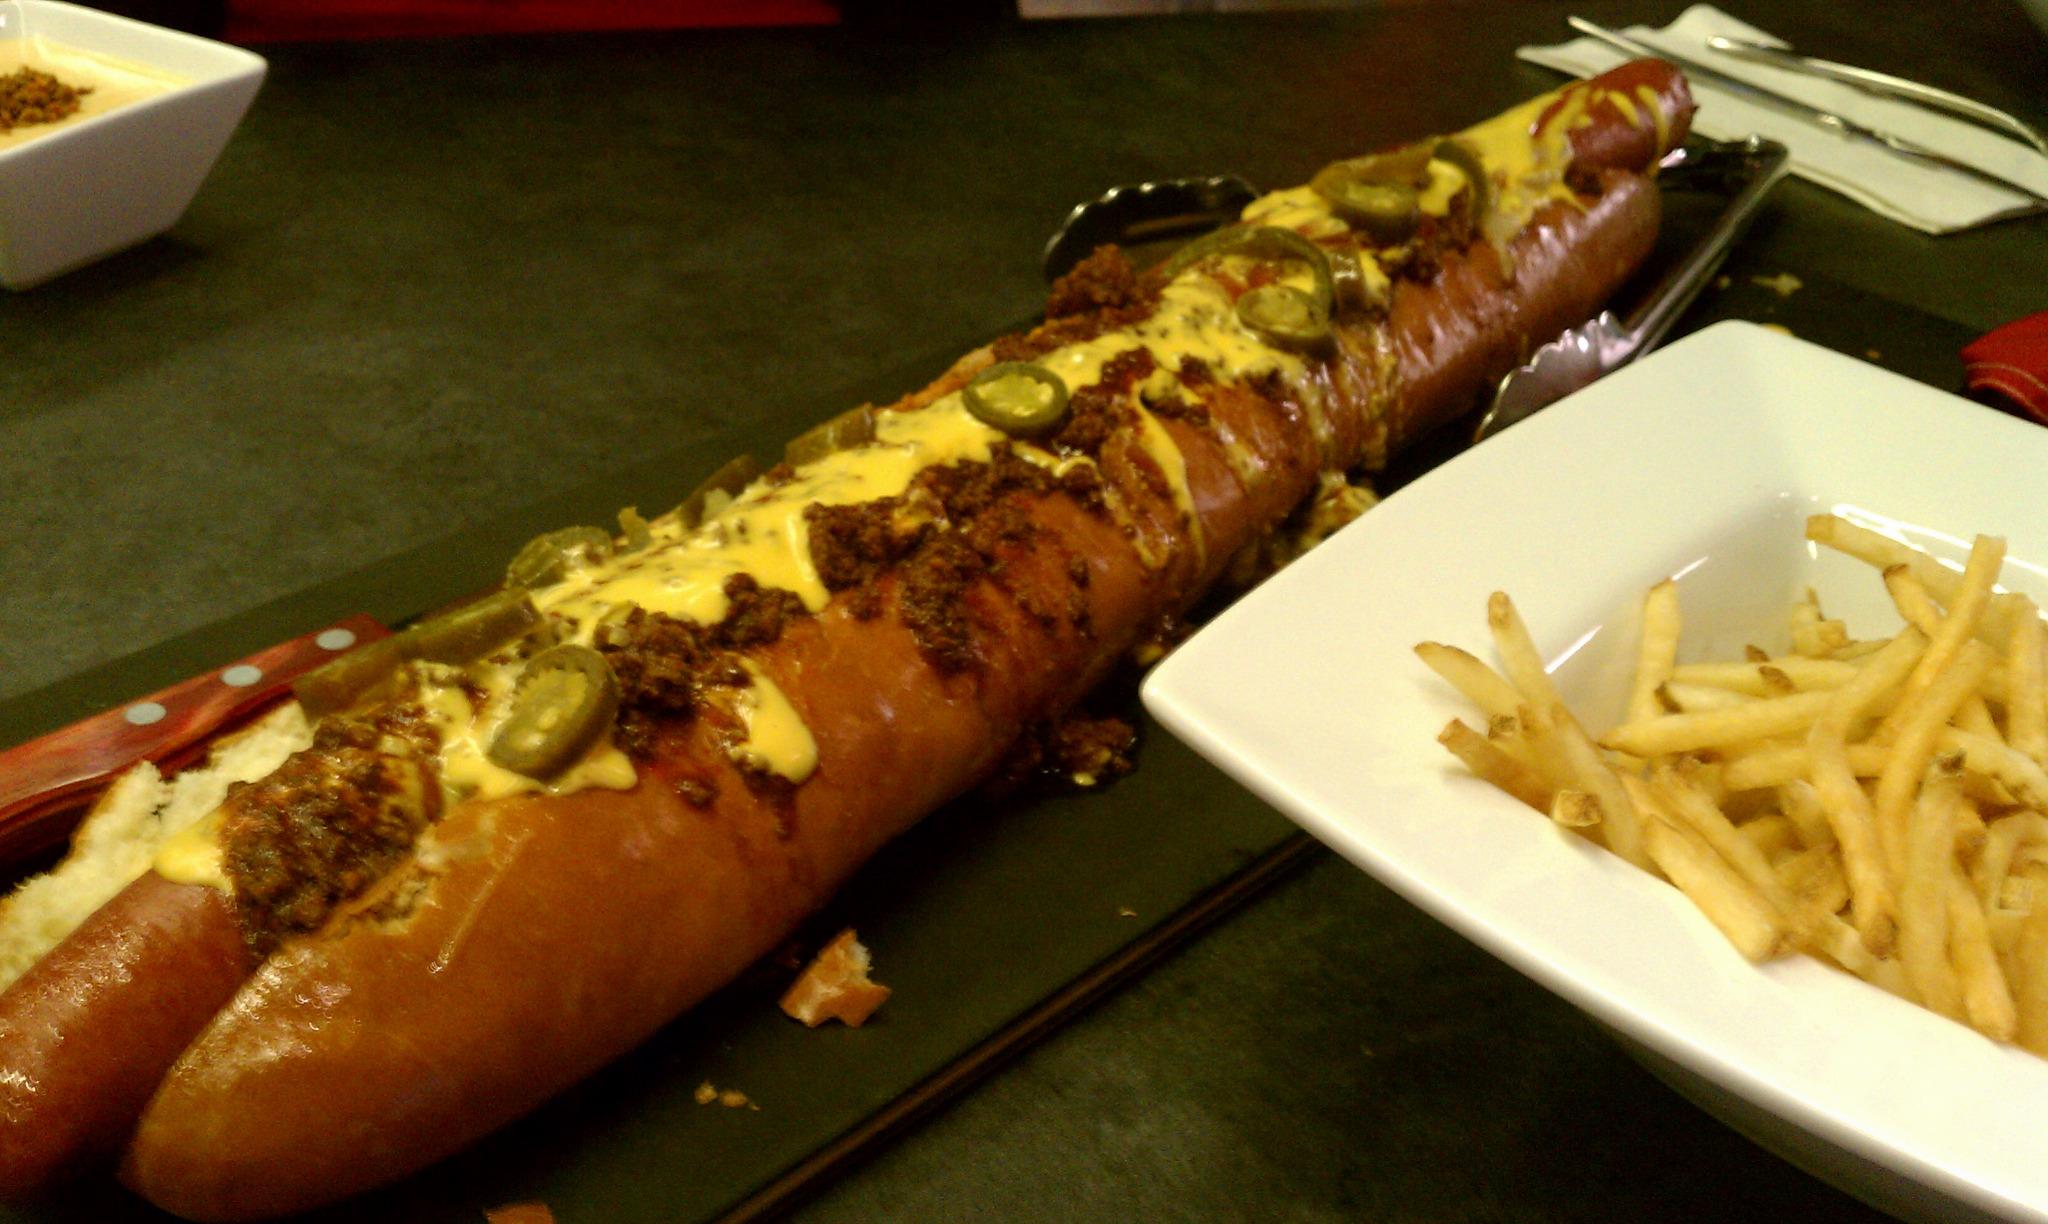 Funky Food Facts on X: The Texas Rangers sell a hot dog called